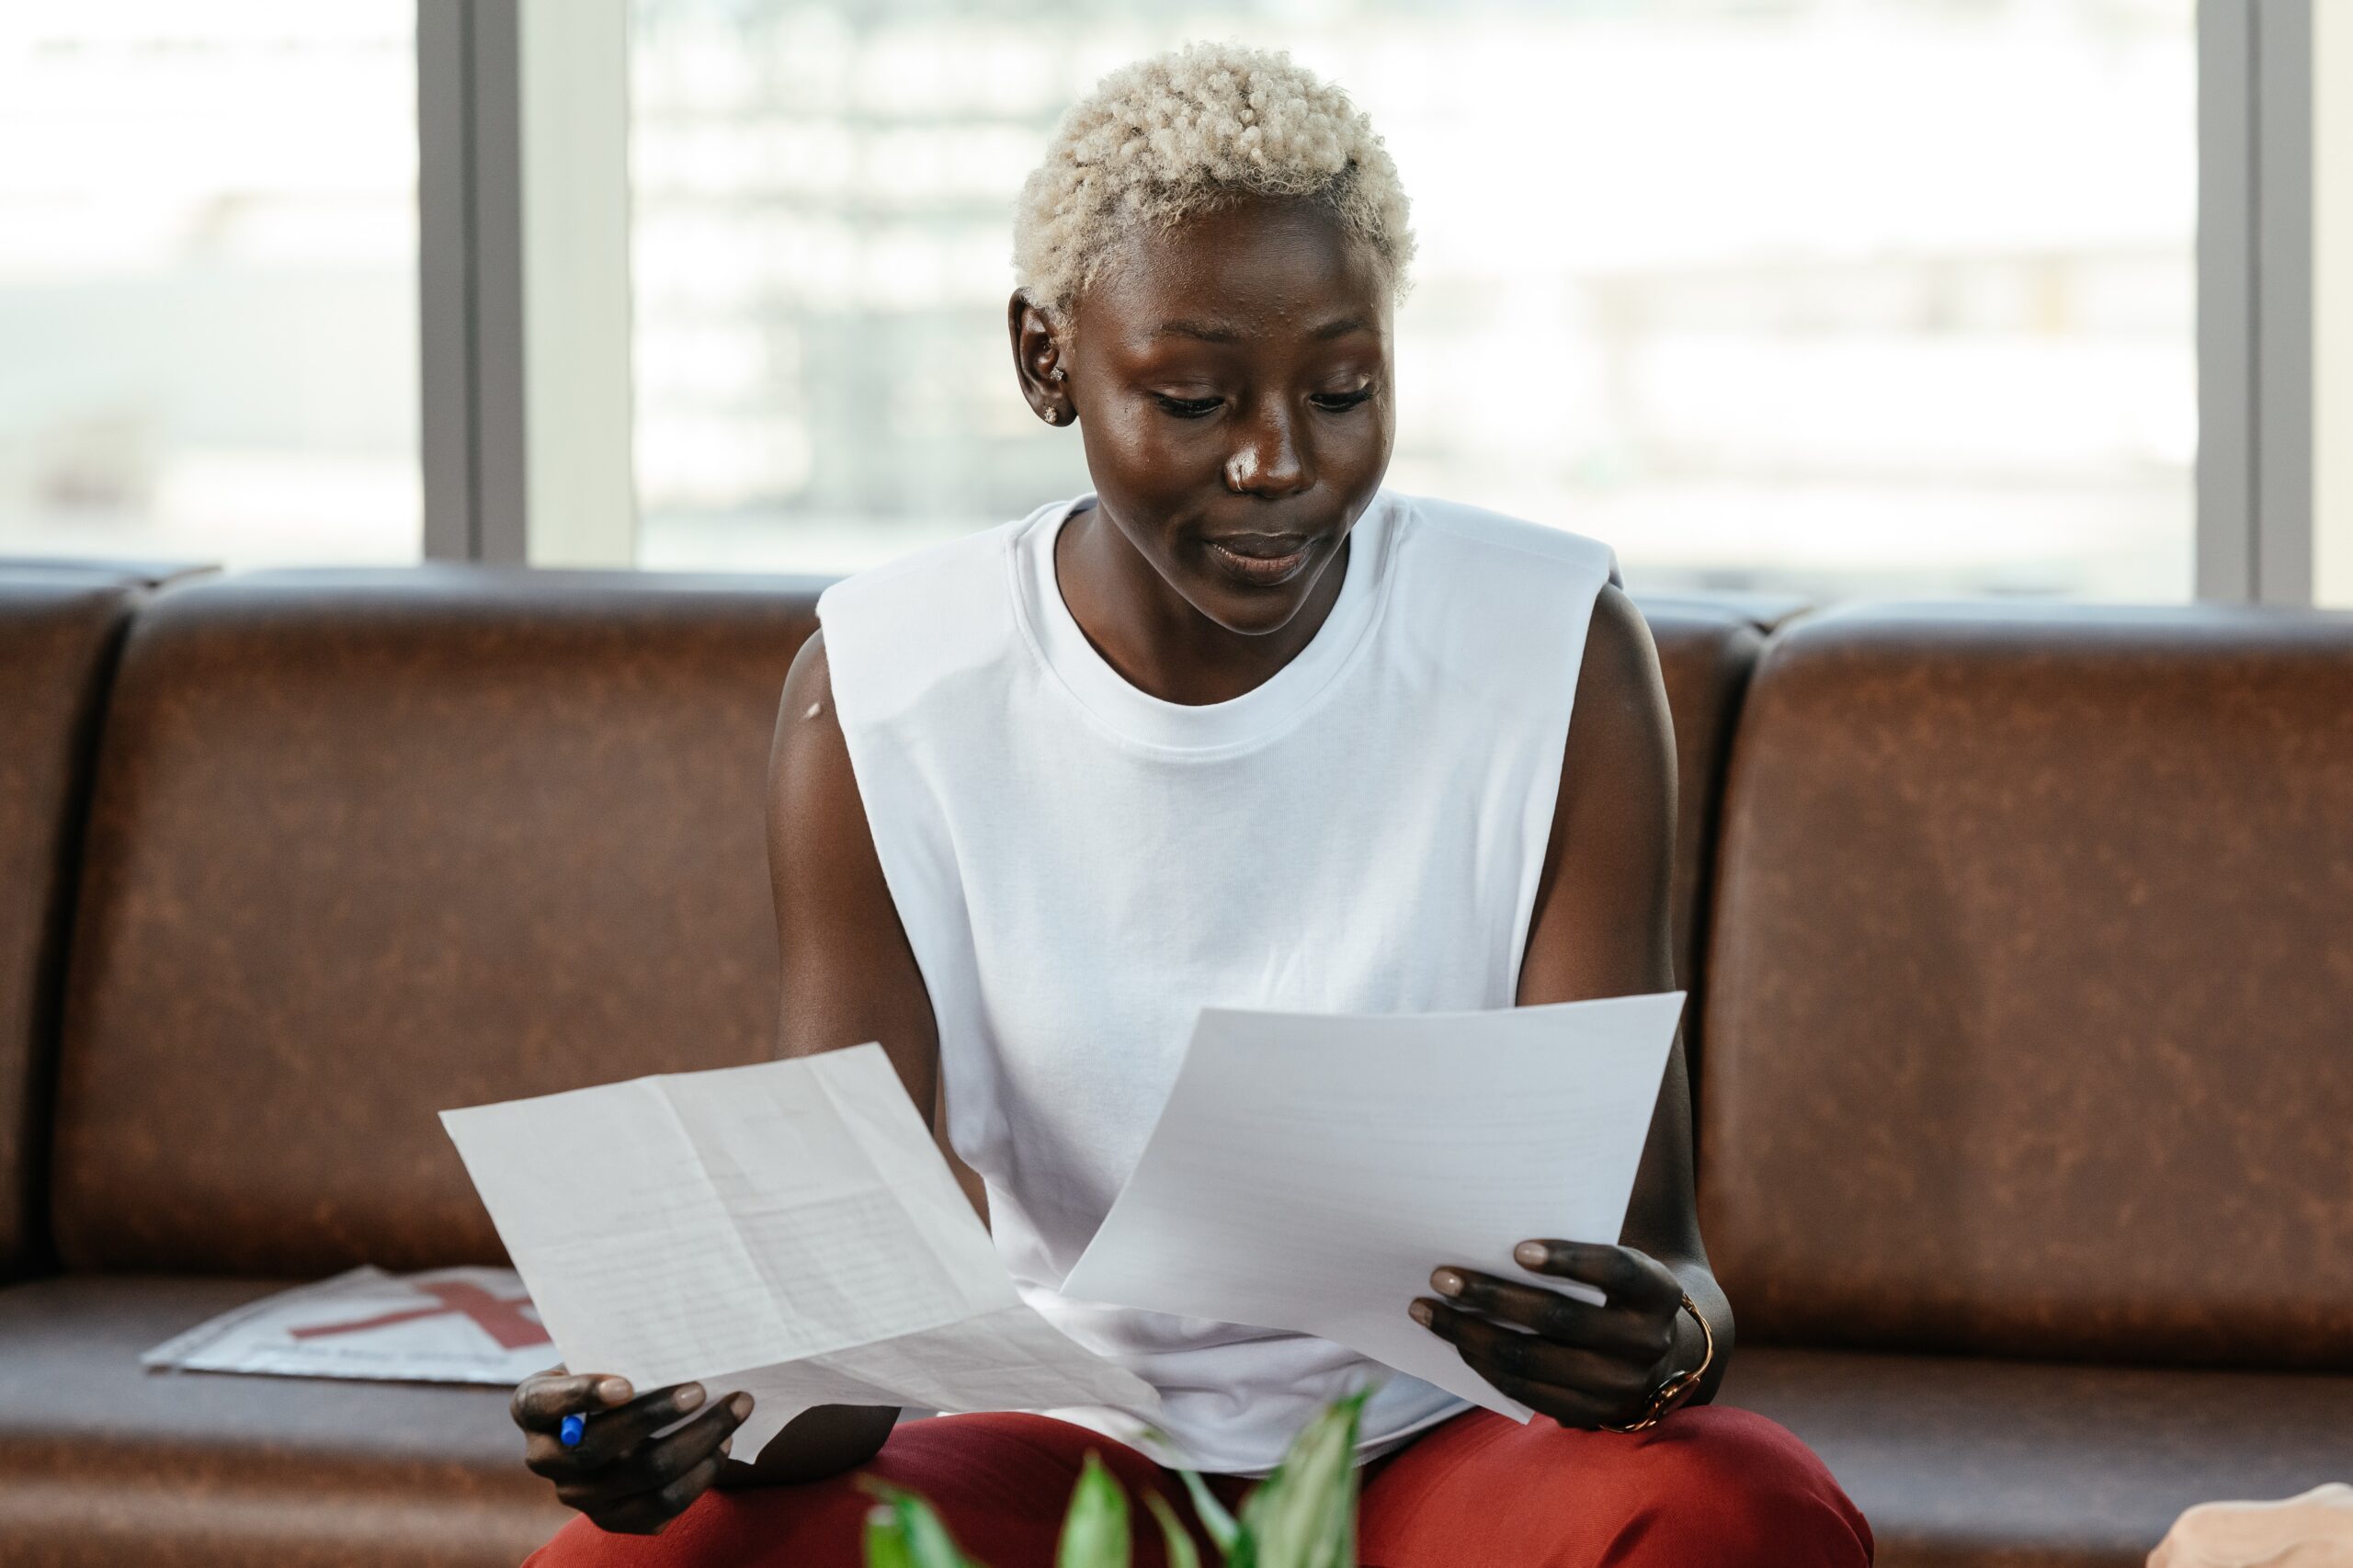 black woman examining divorce papers while sitting on a couch